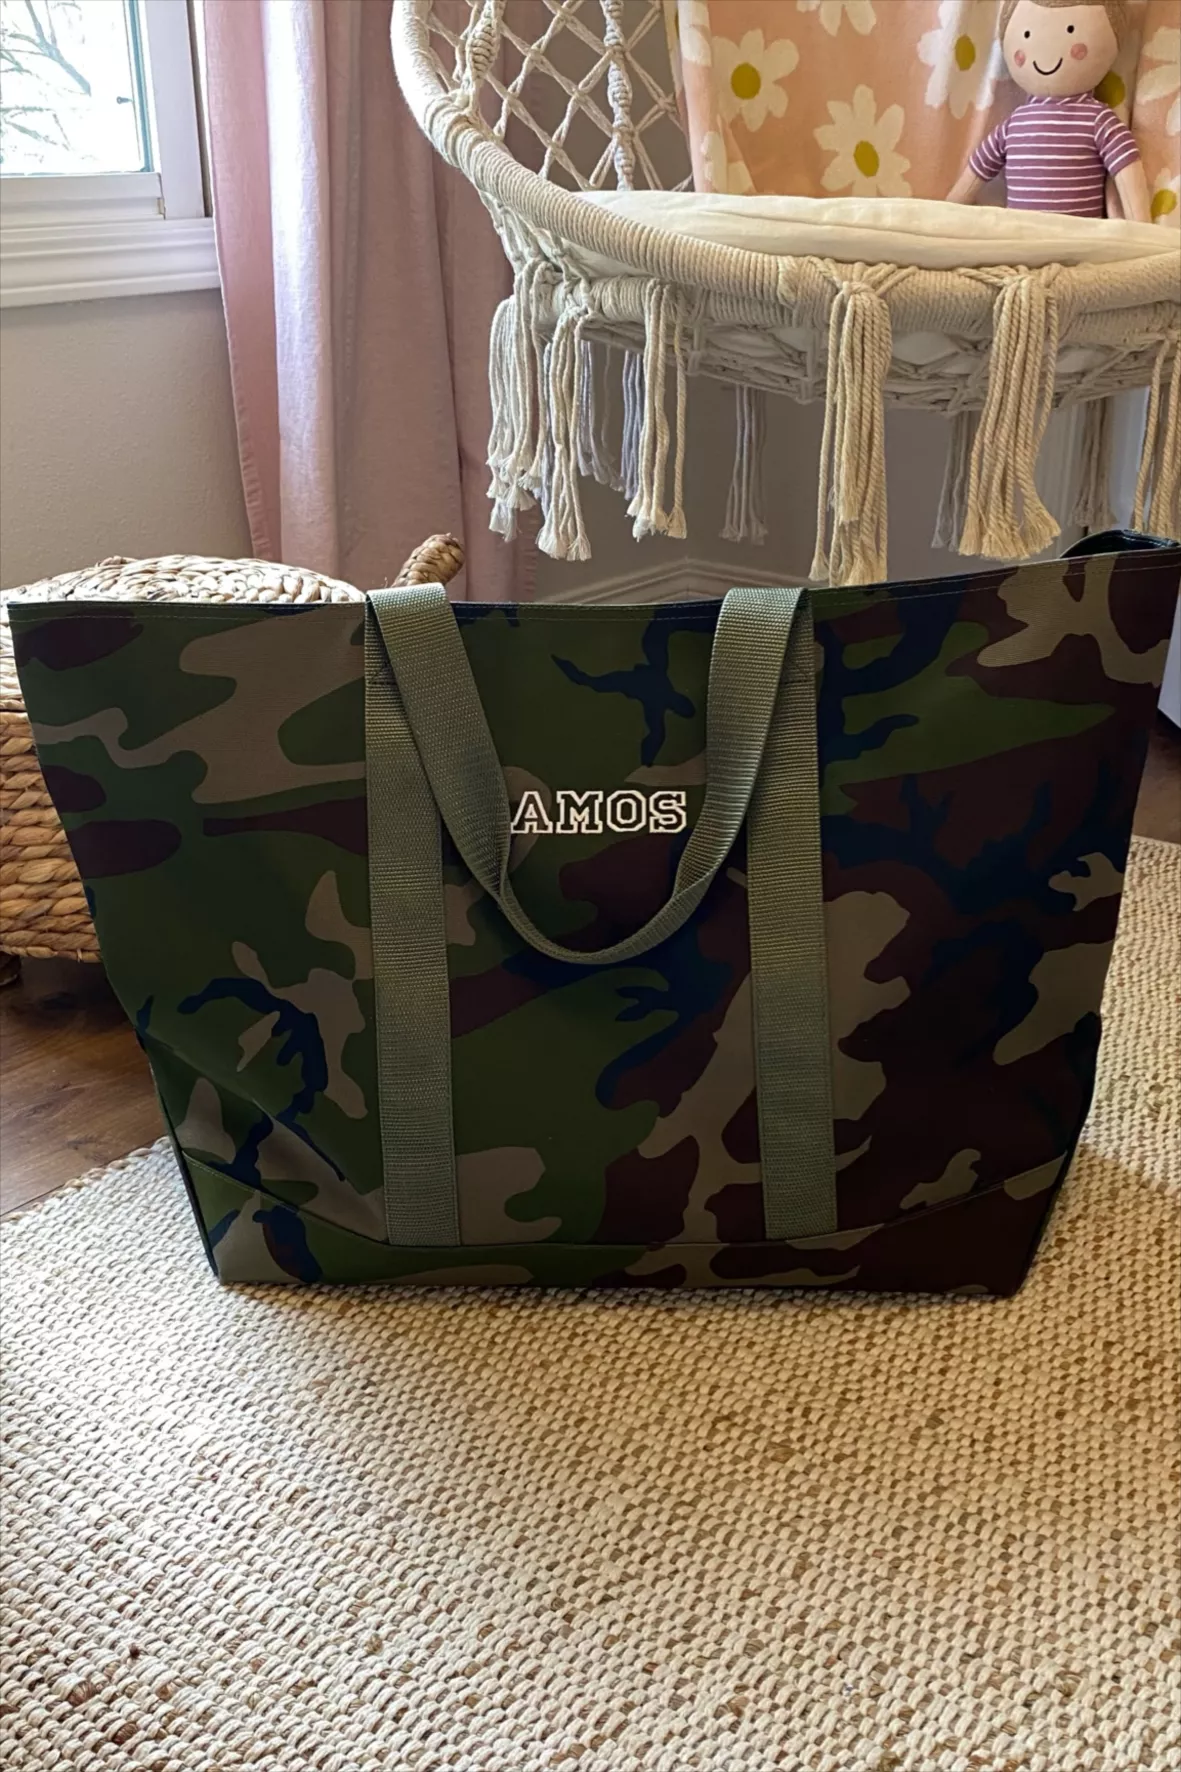 Hunter's Tote Bag, Zip-Top with Strap, Camouflage